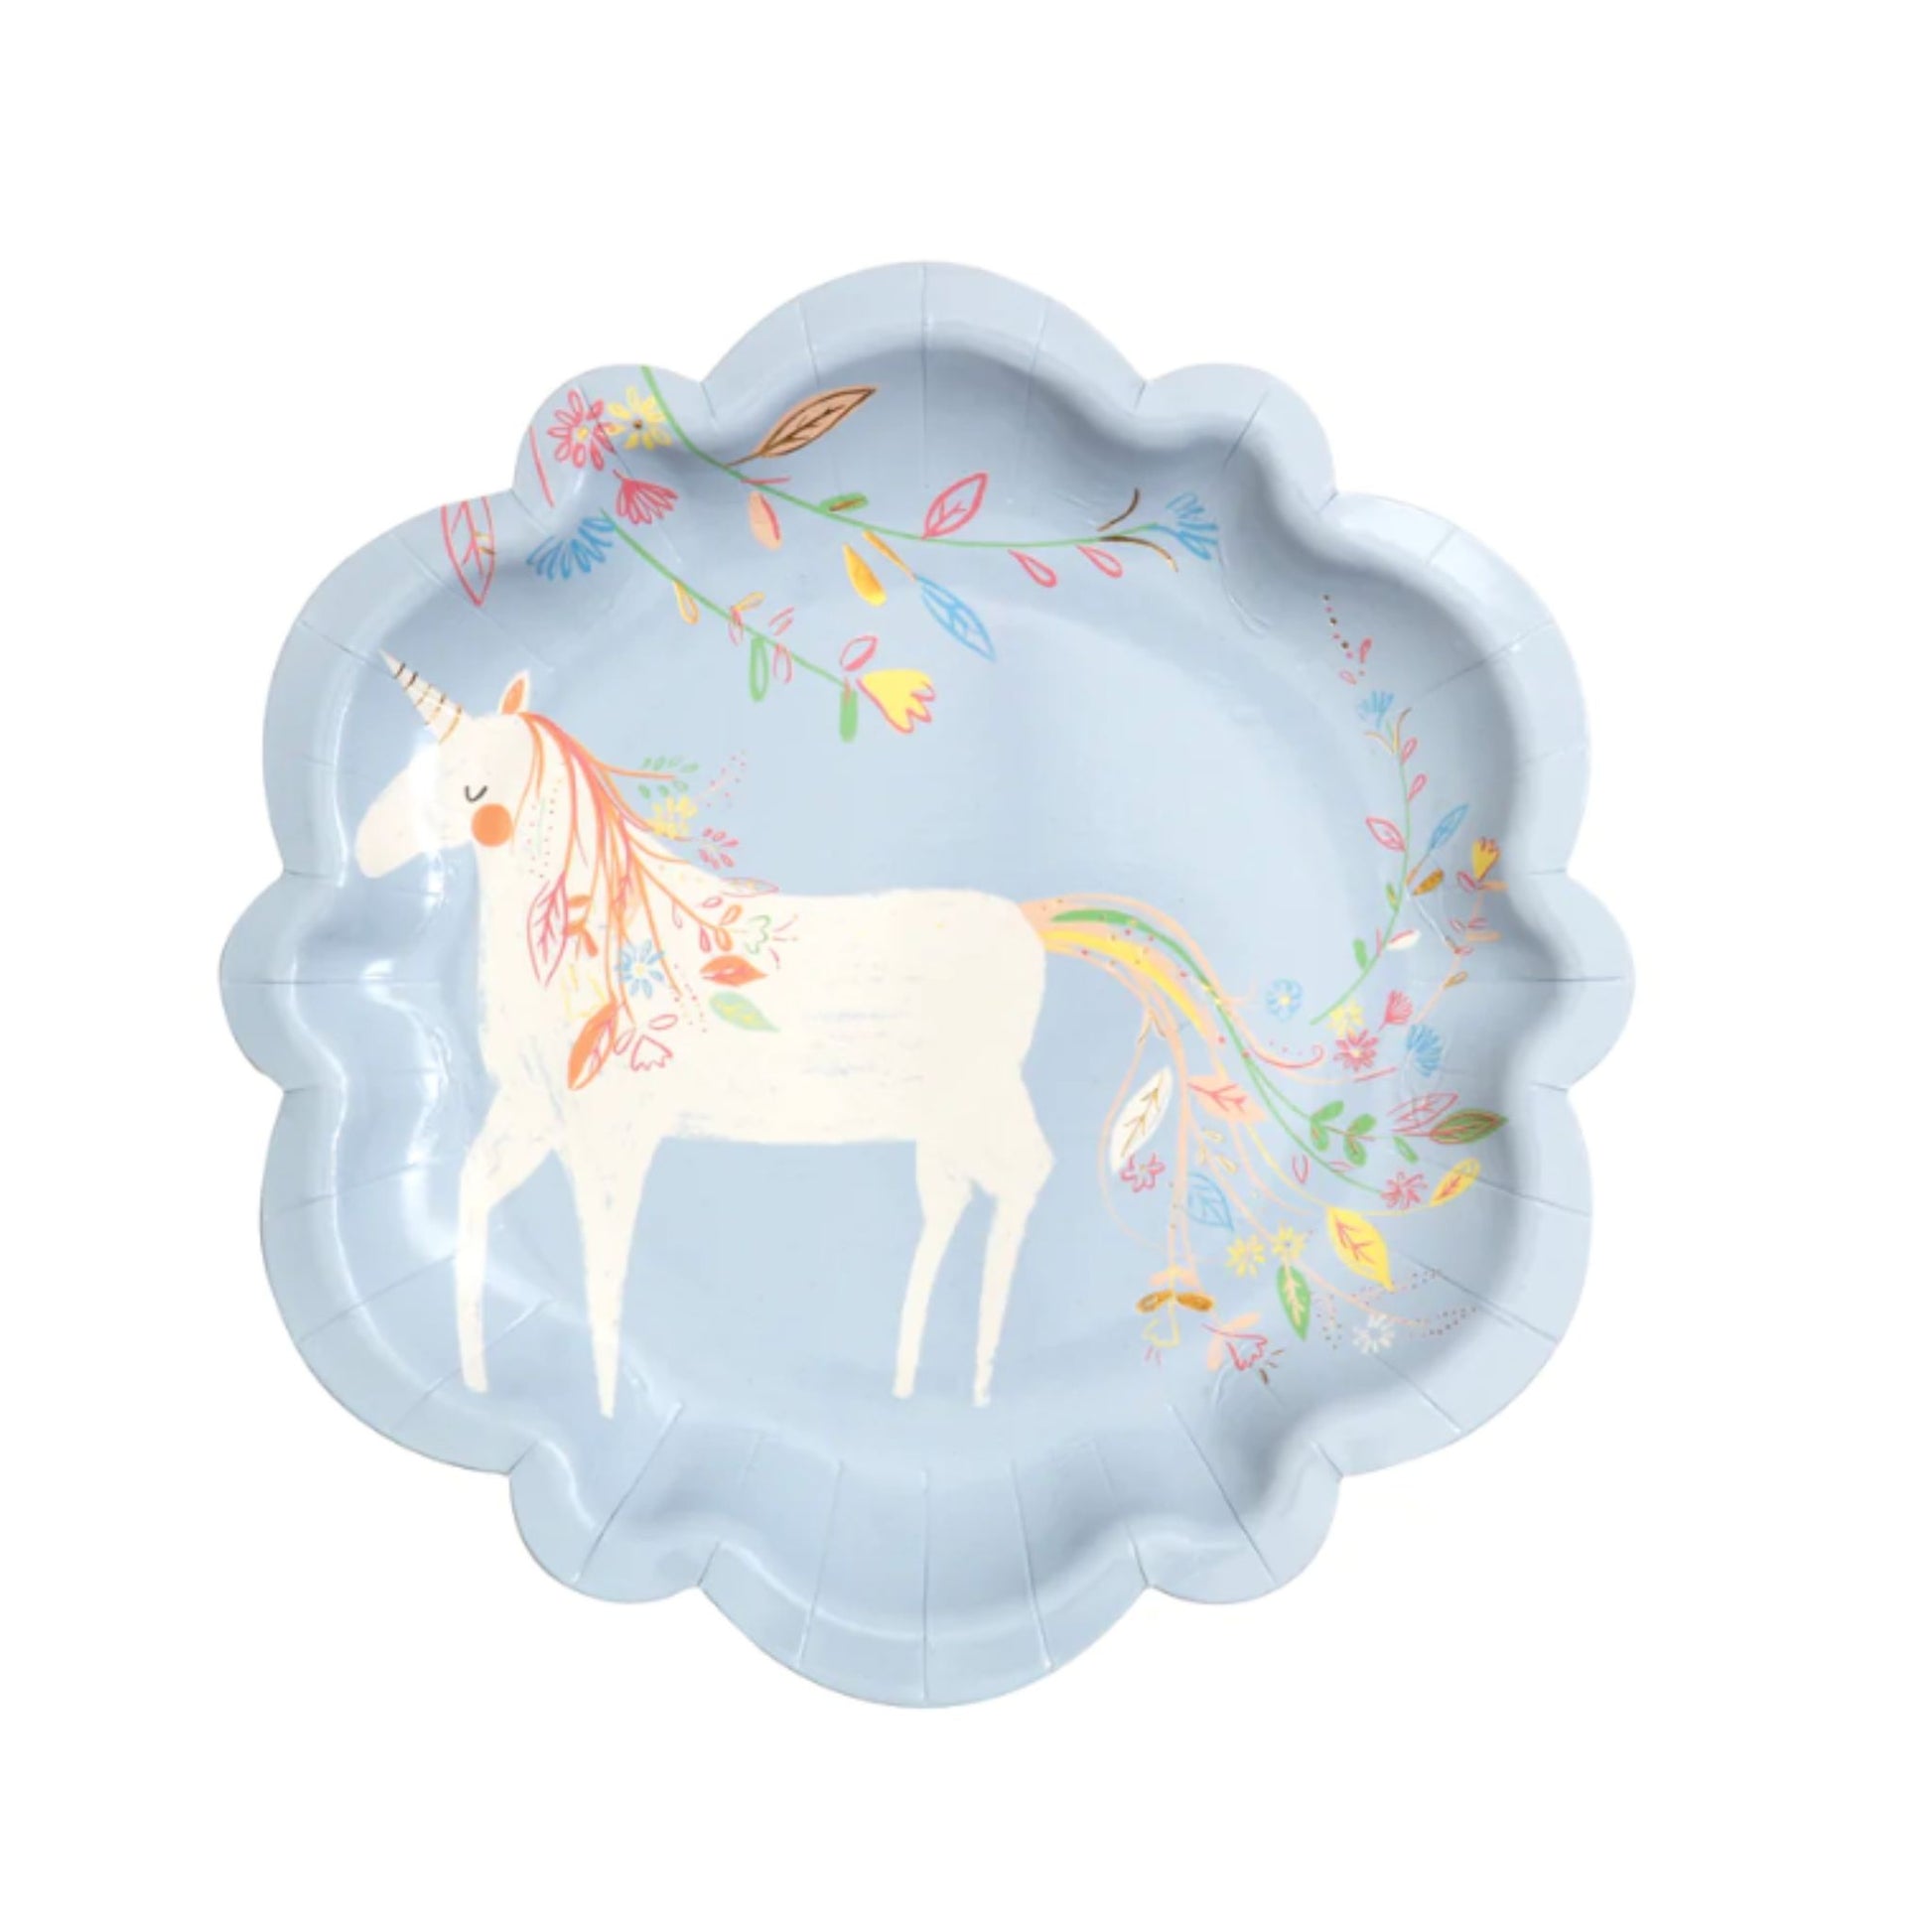 Gorgeous Pale Blue Unicorn Side Plates By Meri Meri With Scalloped Edges & Printed With White Unicorn, Floral & Gold Detail. 8pack